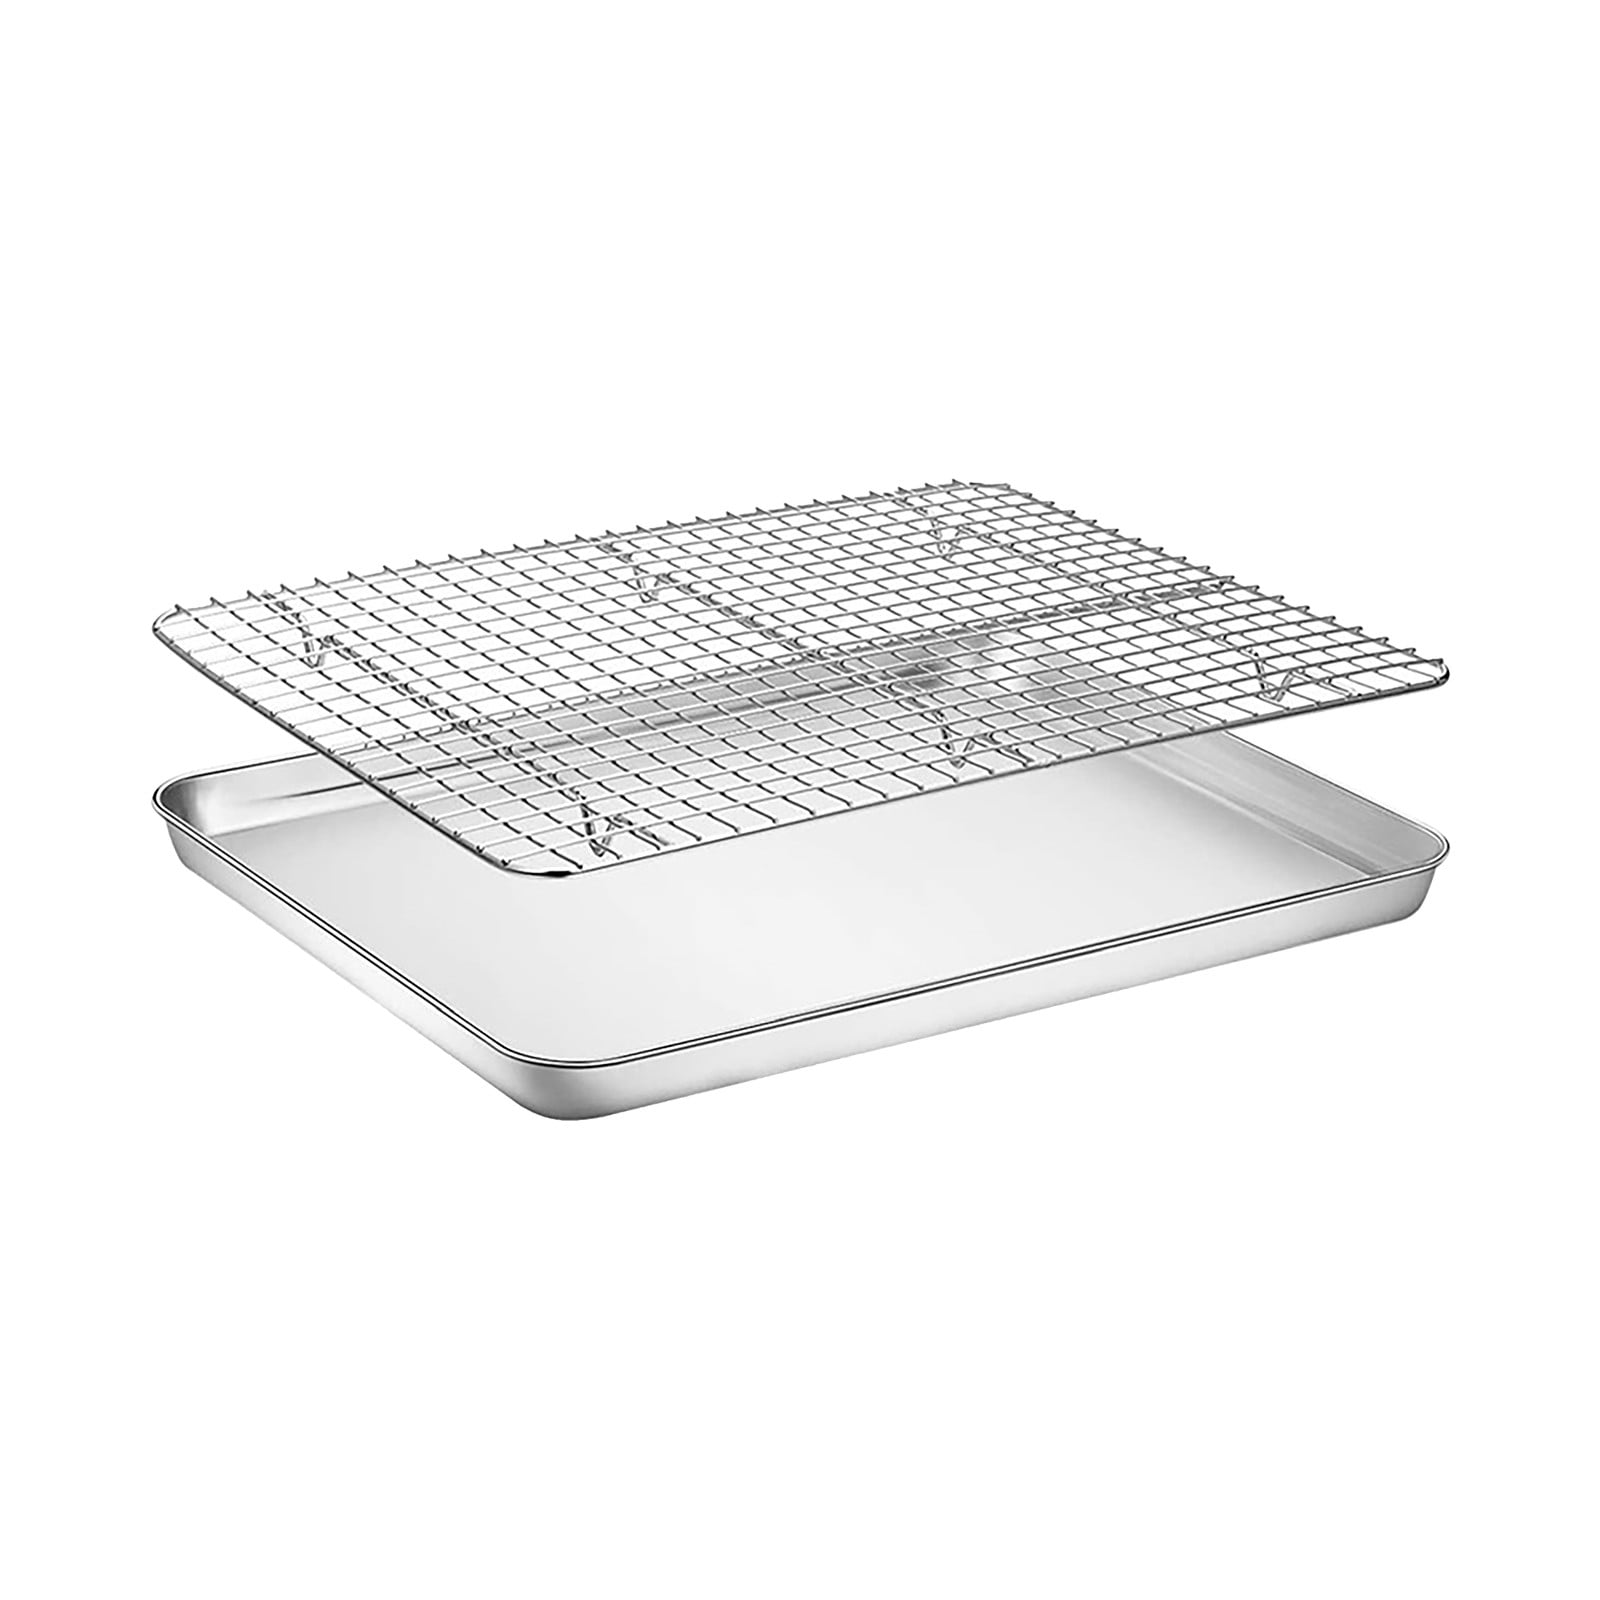 EMDMAK 6 Piece Baking Sheets with Cooling Rack Set, 16 x 12 x 1 Inch  Stainless Steel Cookie Sheet and Wire Rack & Baking Mat for Baking,  Dishwasher